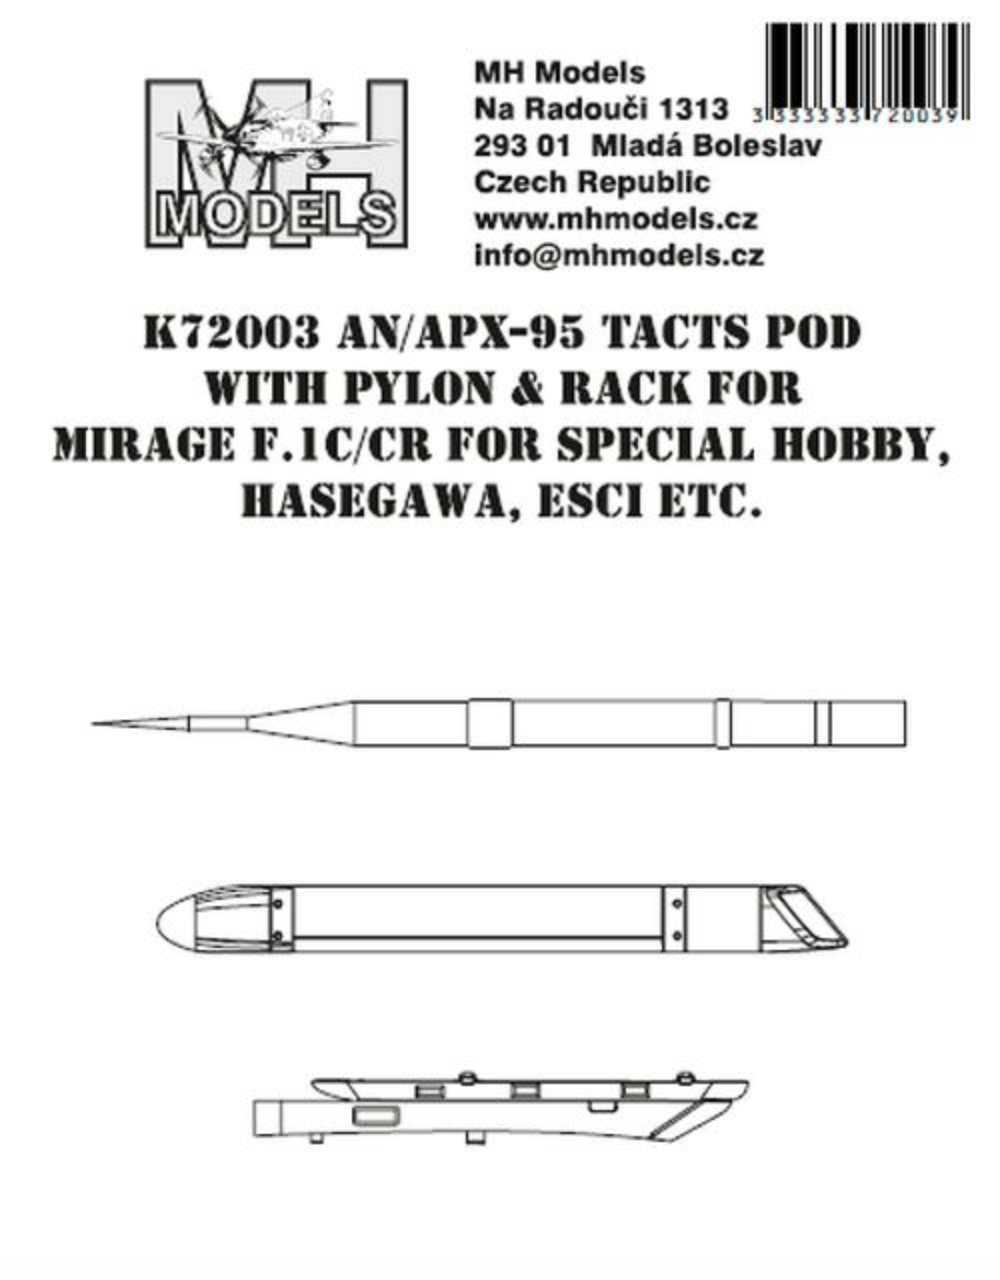 AN/APX-95 TACTS POD for Mirage F1 - MH Models K72003 Captur36